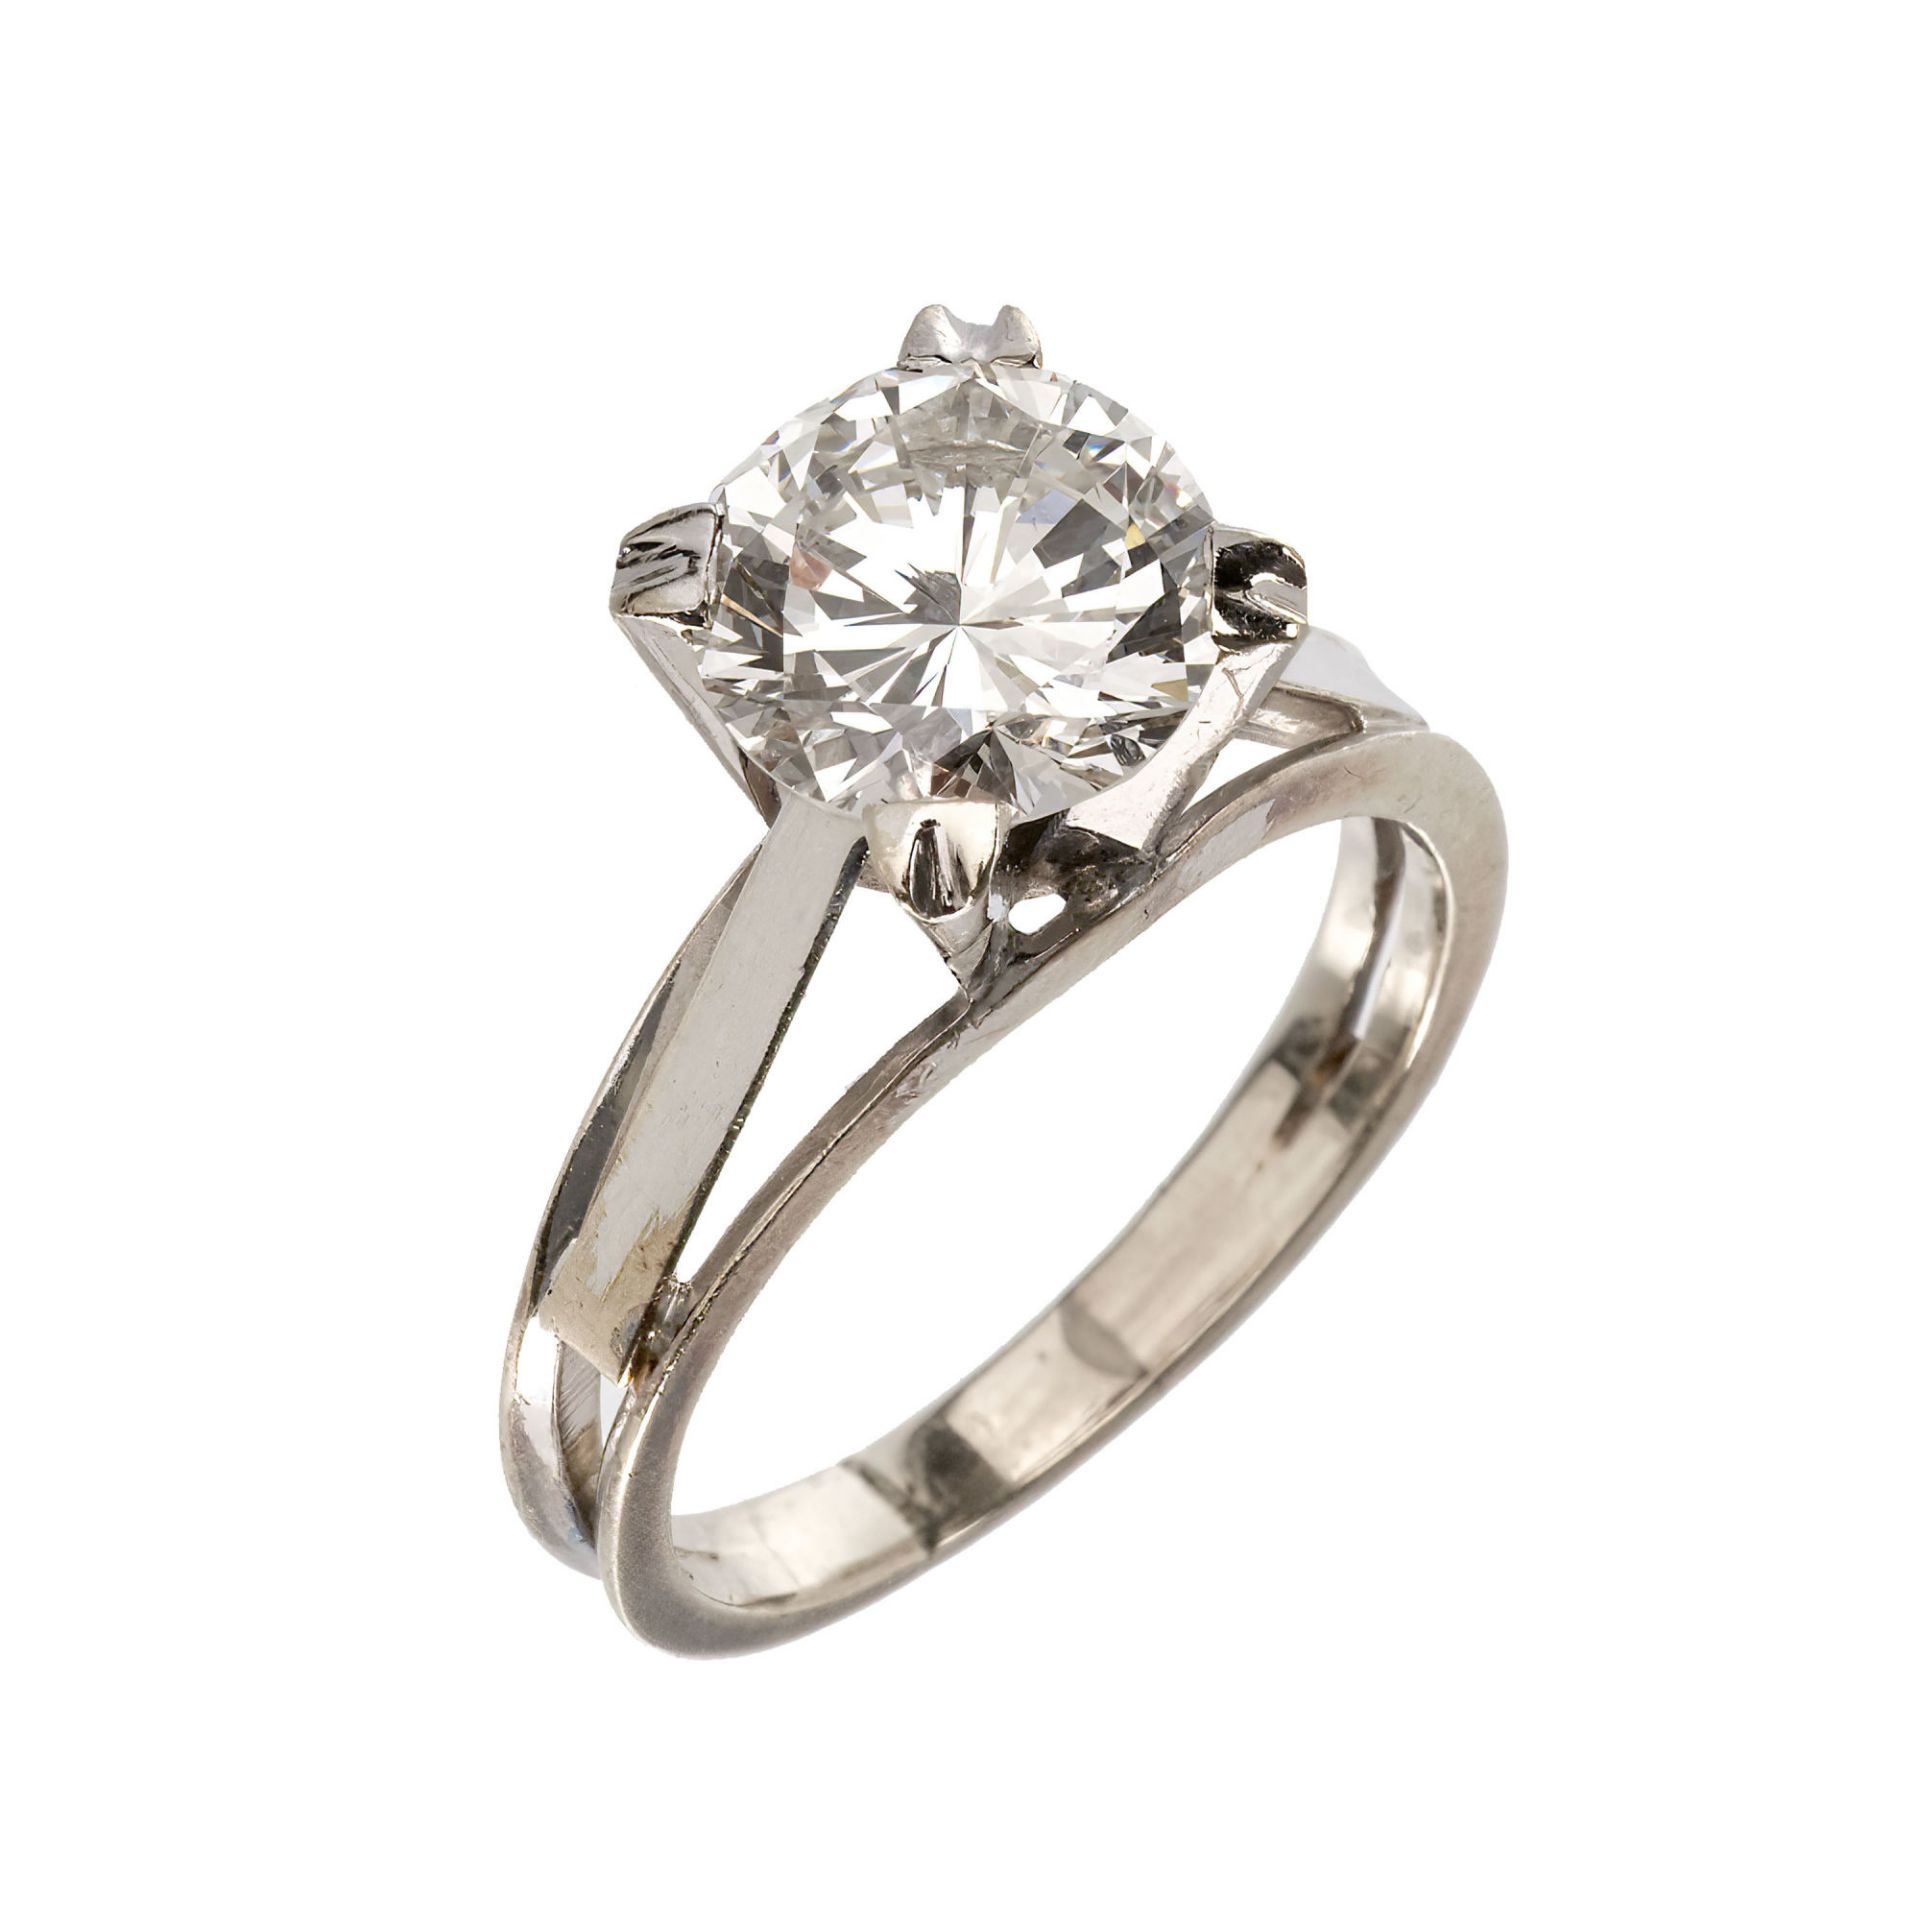 SOLITAIRE-RING / Solitaire-ring